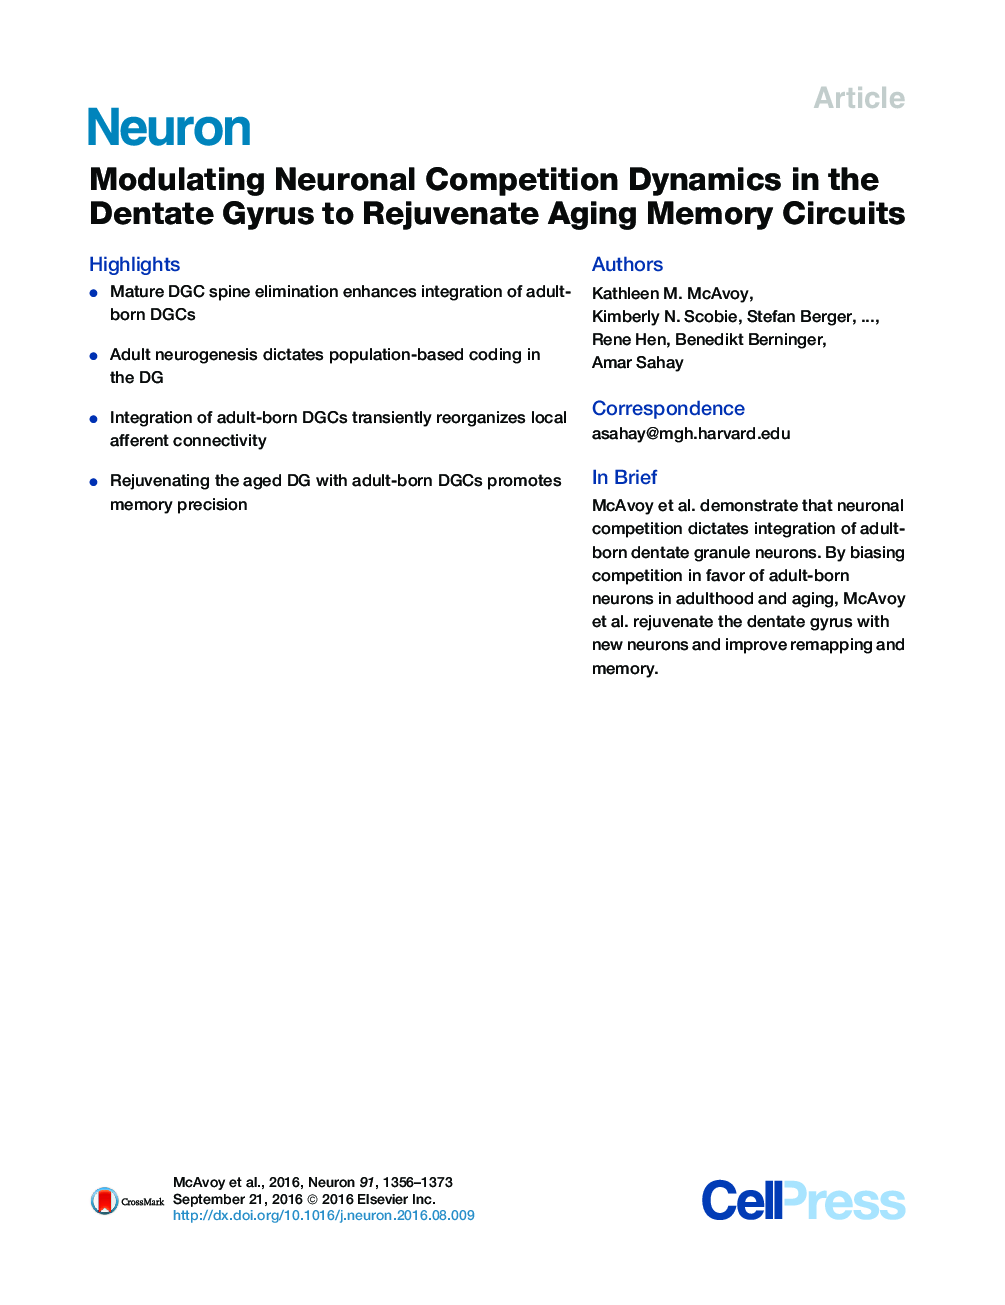 Modulating Neuronal Competition Dynamics in the Dentate Gyrus to Rejuvenate Aging Memory Circuits